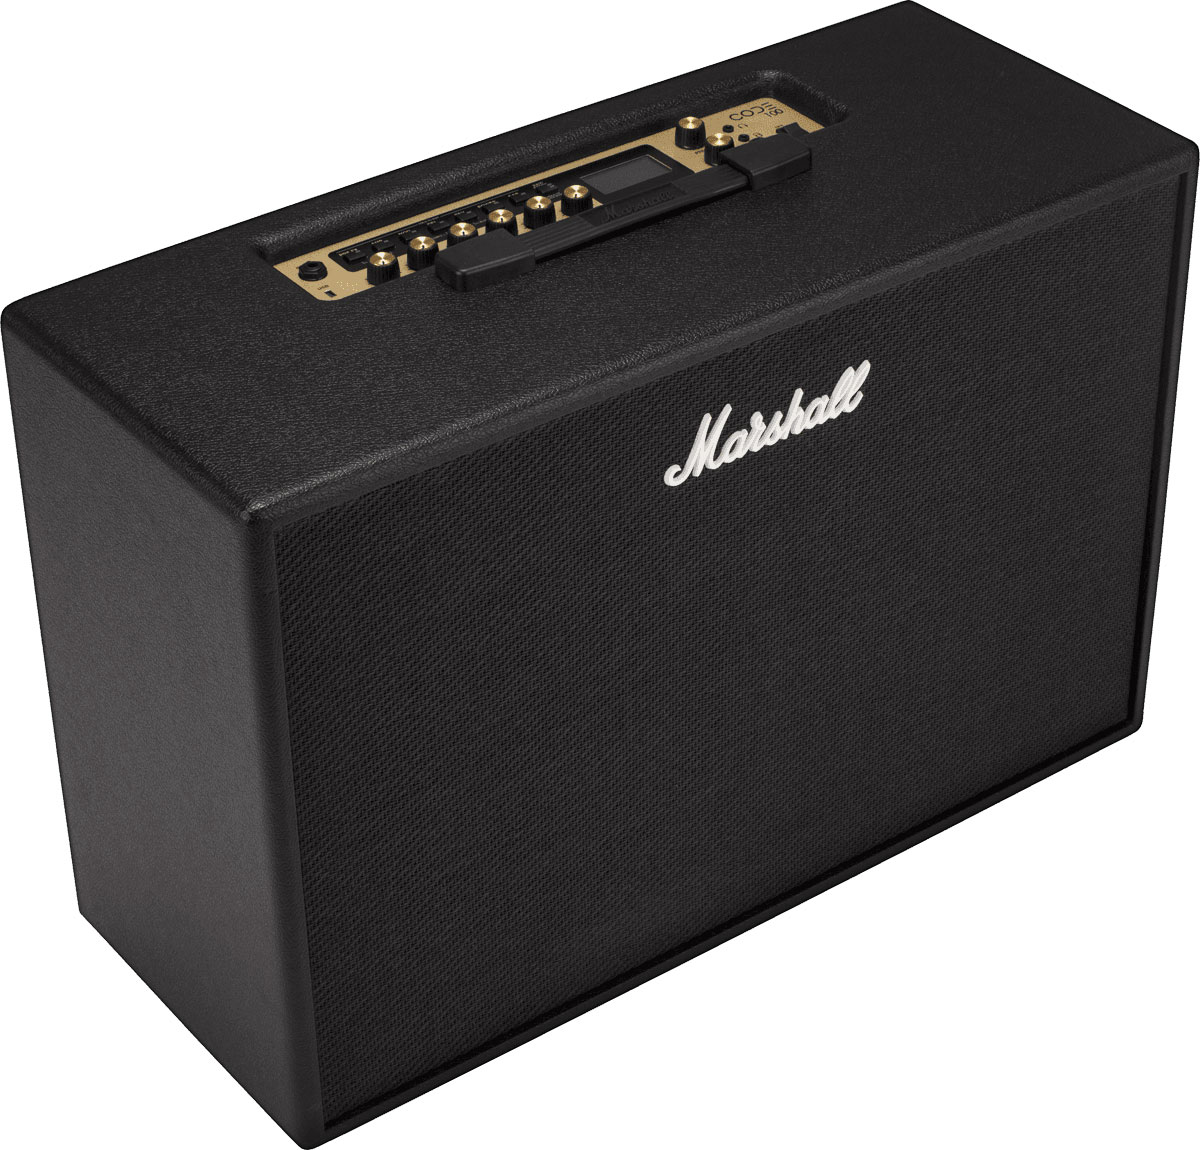 MARSHALL Combo 100 W VIDE - RECONDITIONNE